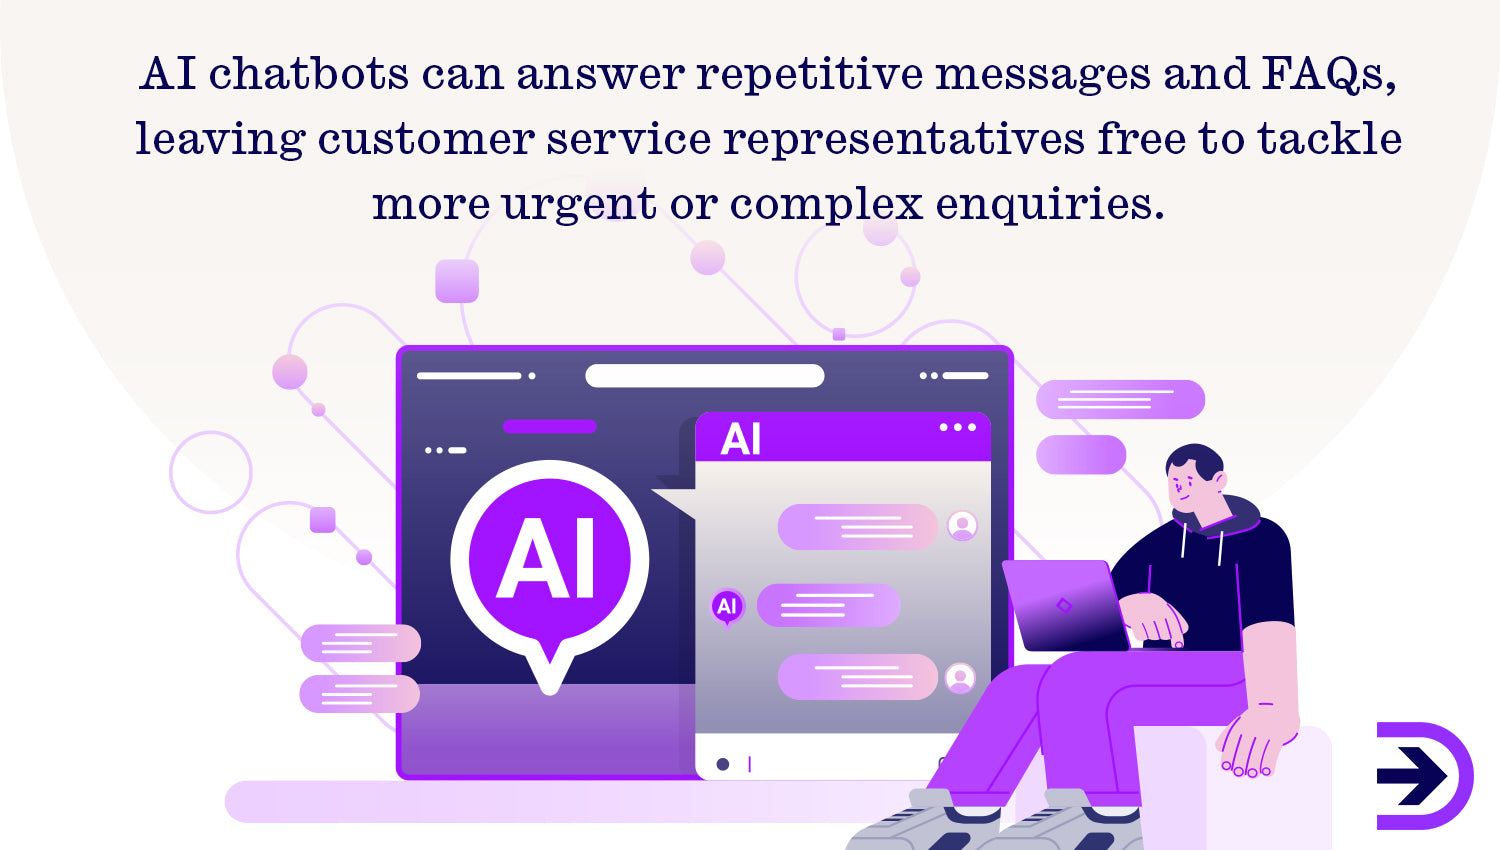 AI integration across analytics and customer service provides an enhanced experience for users and can be beneficial for busy customer service representatives.